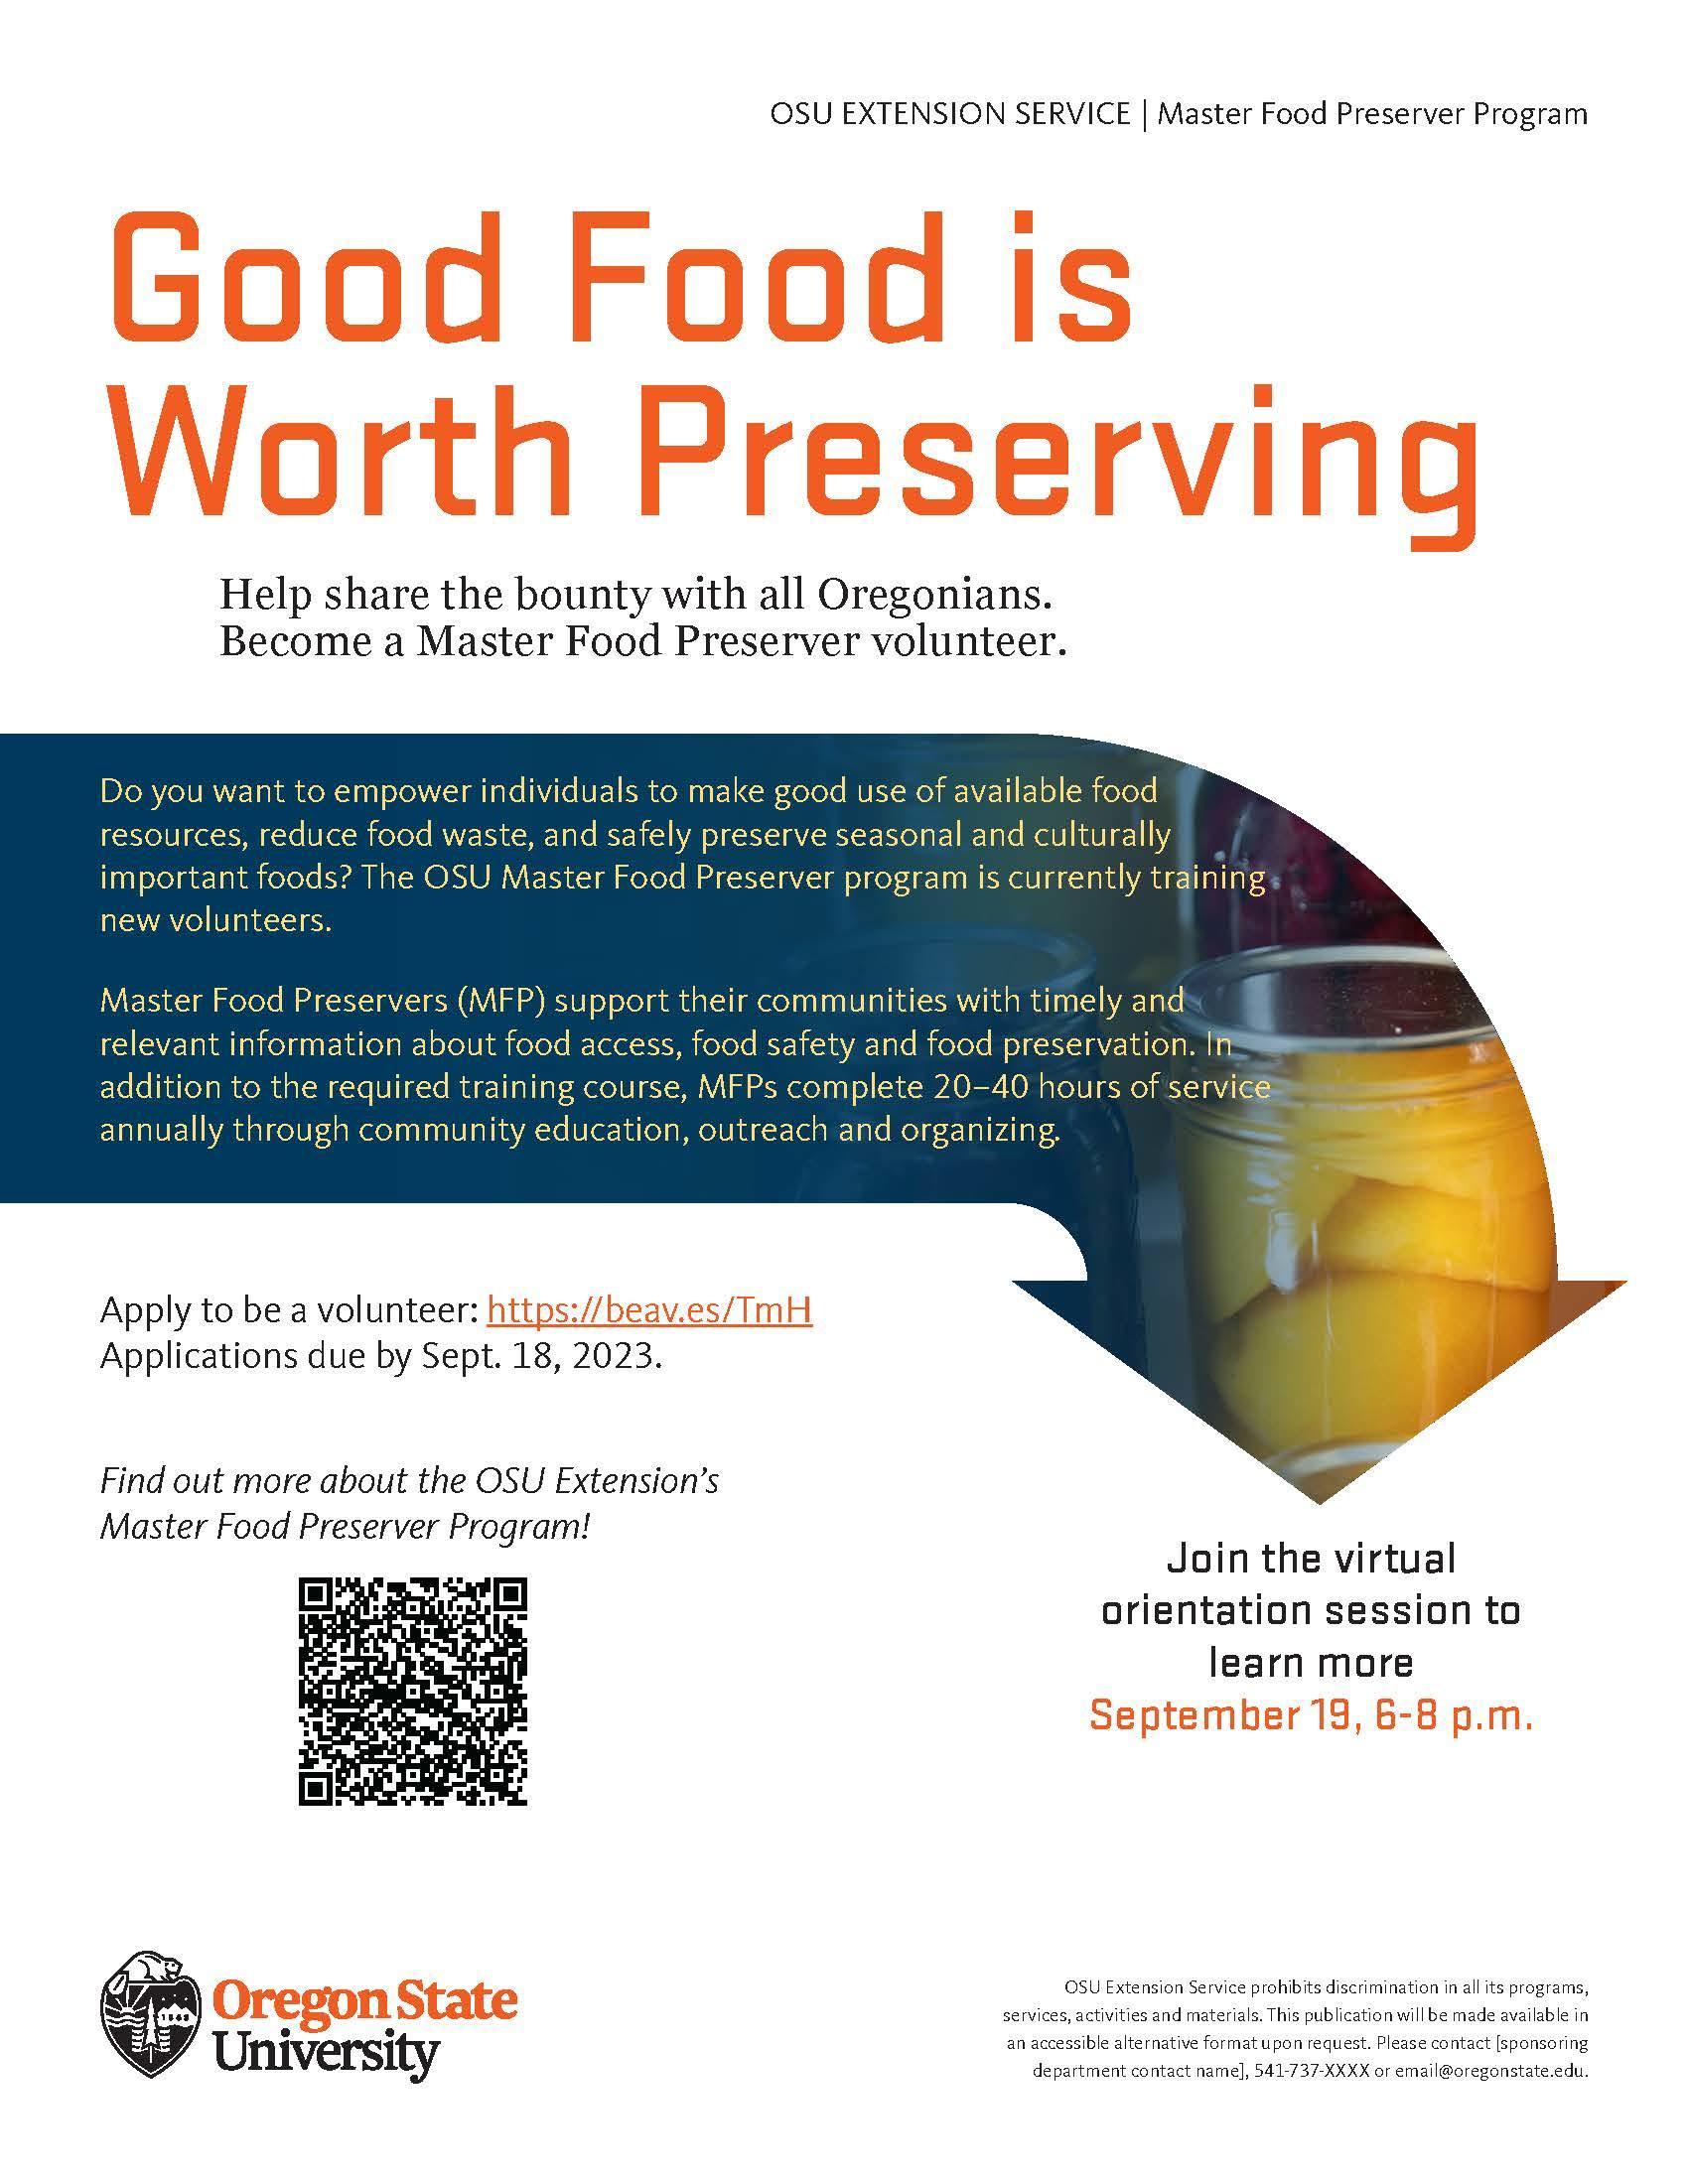 Master Food preservation volunteer training flyer showing a quart of peaches.